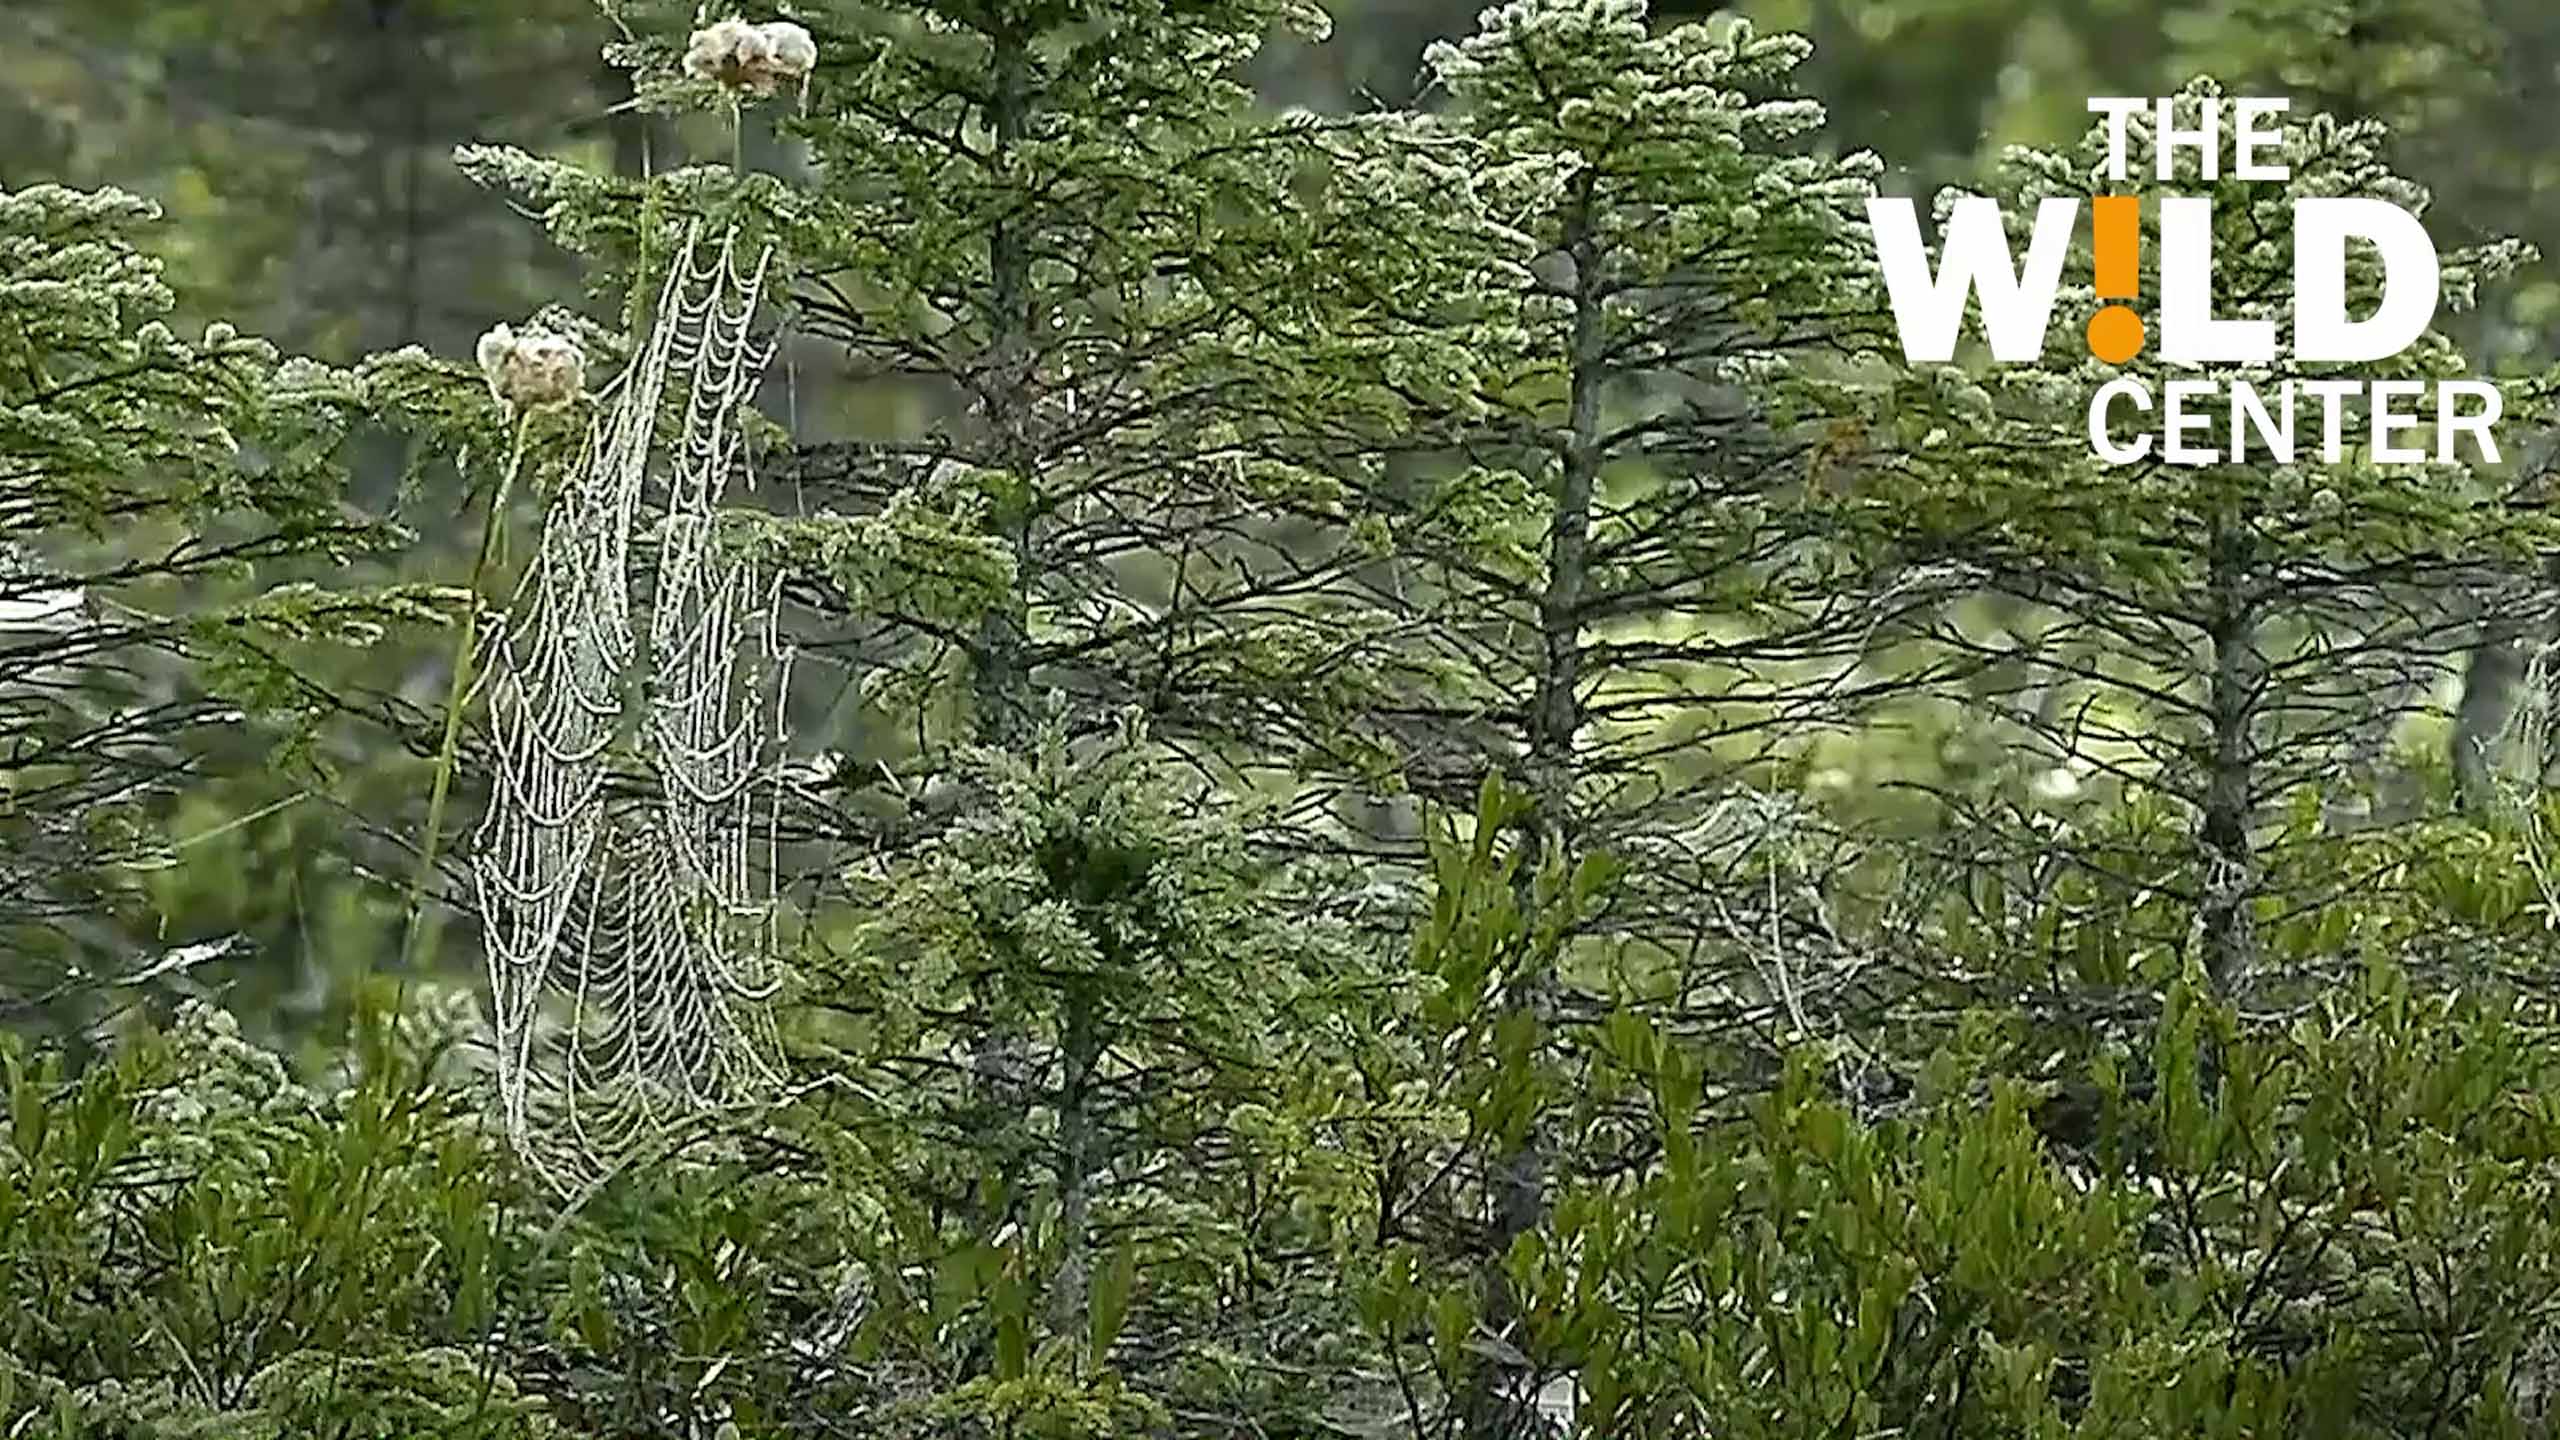 Forest scene featuring large spider-web spun between tree branches